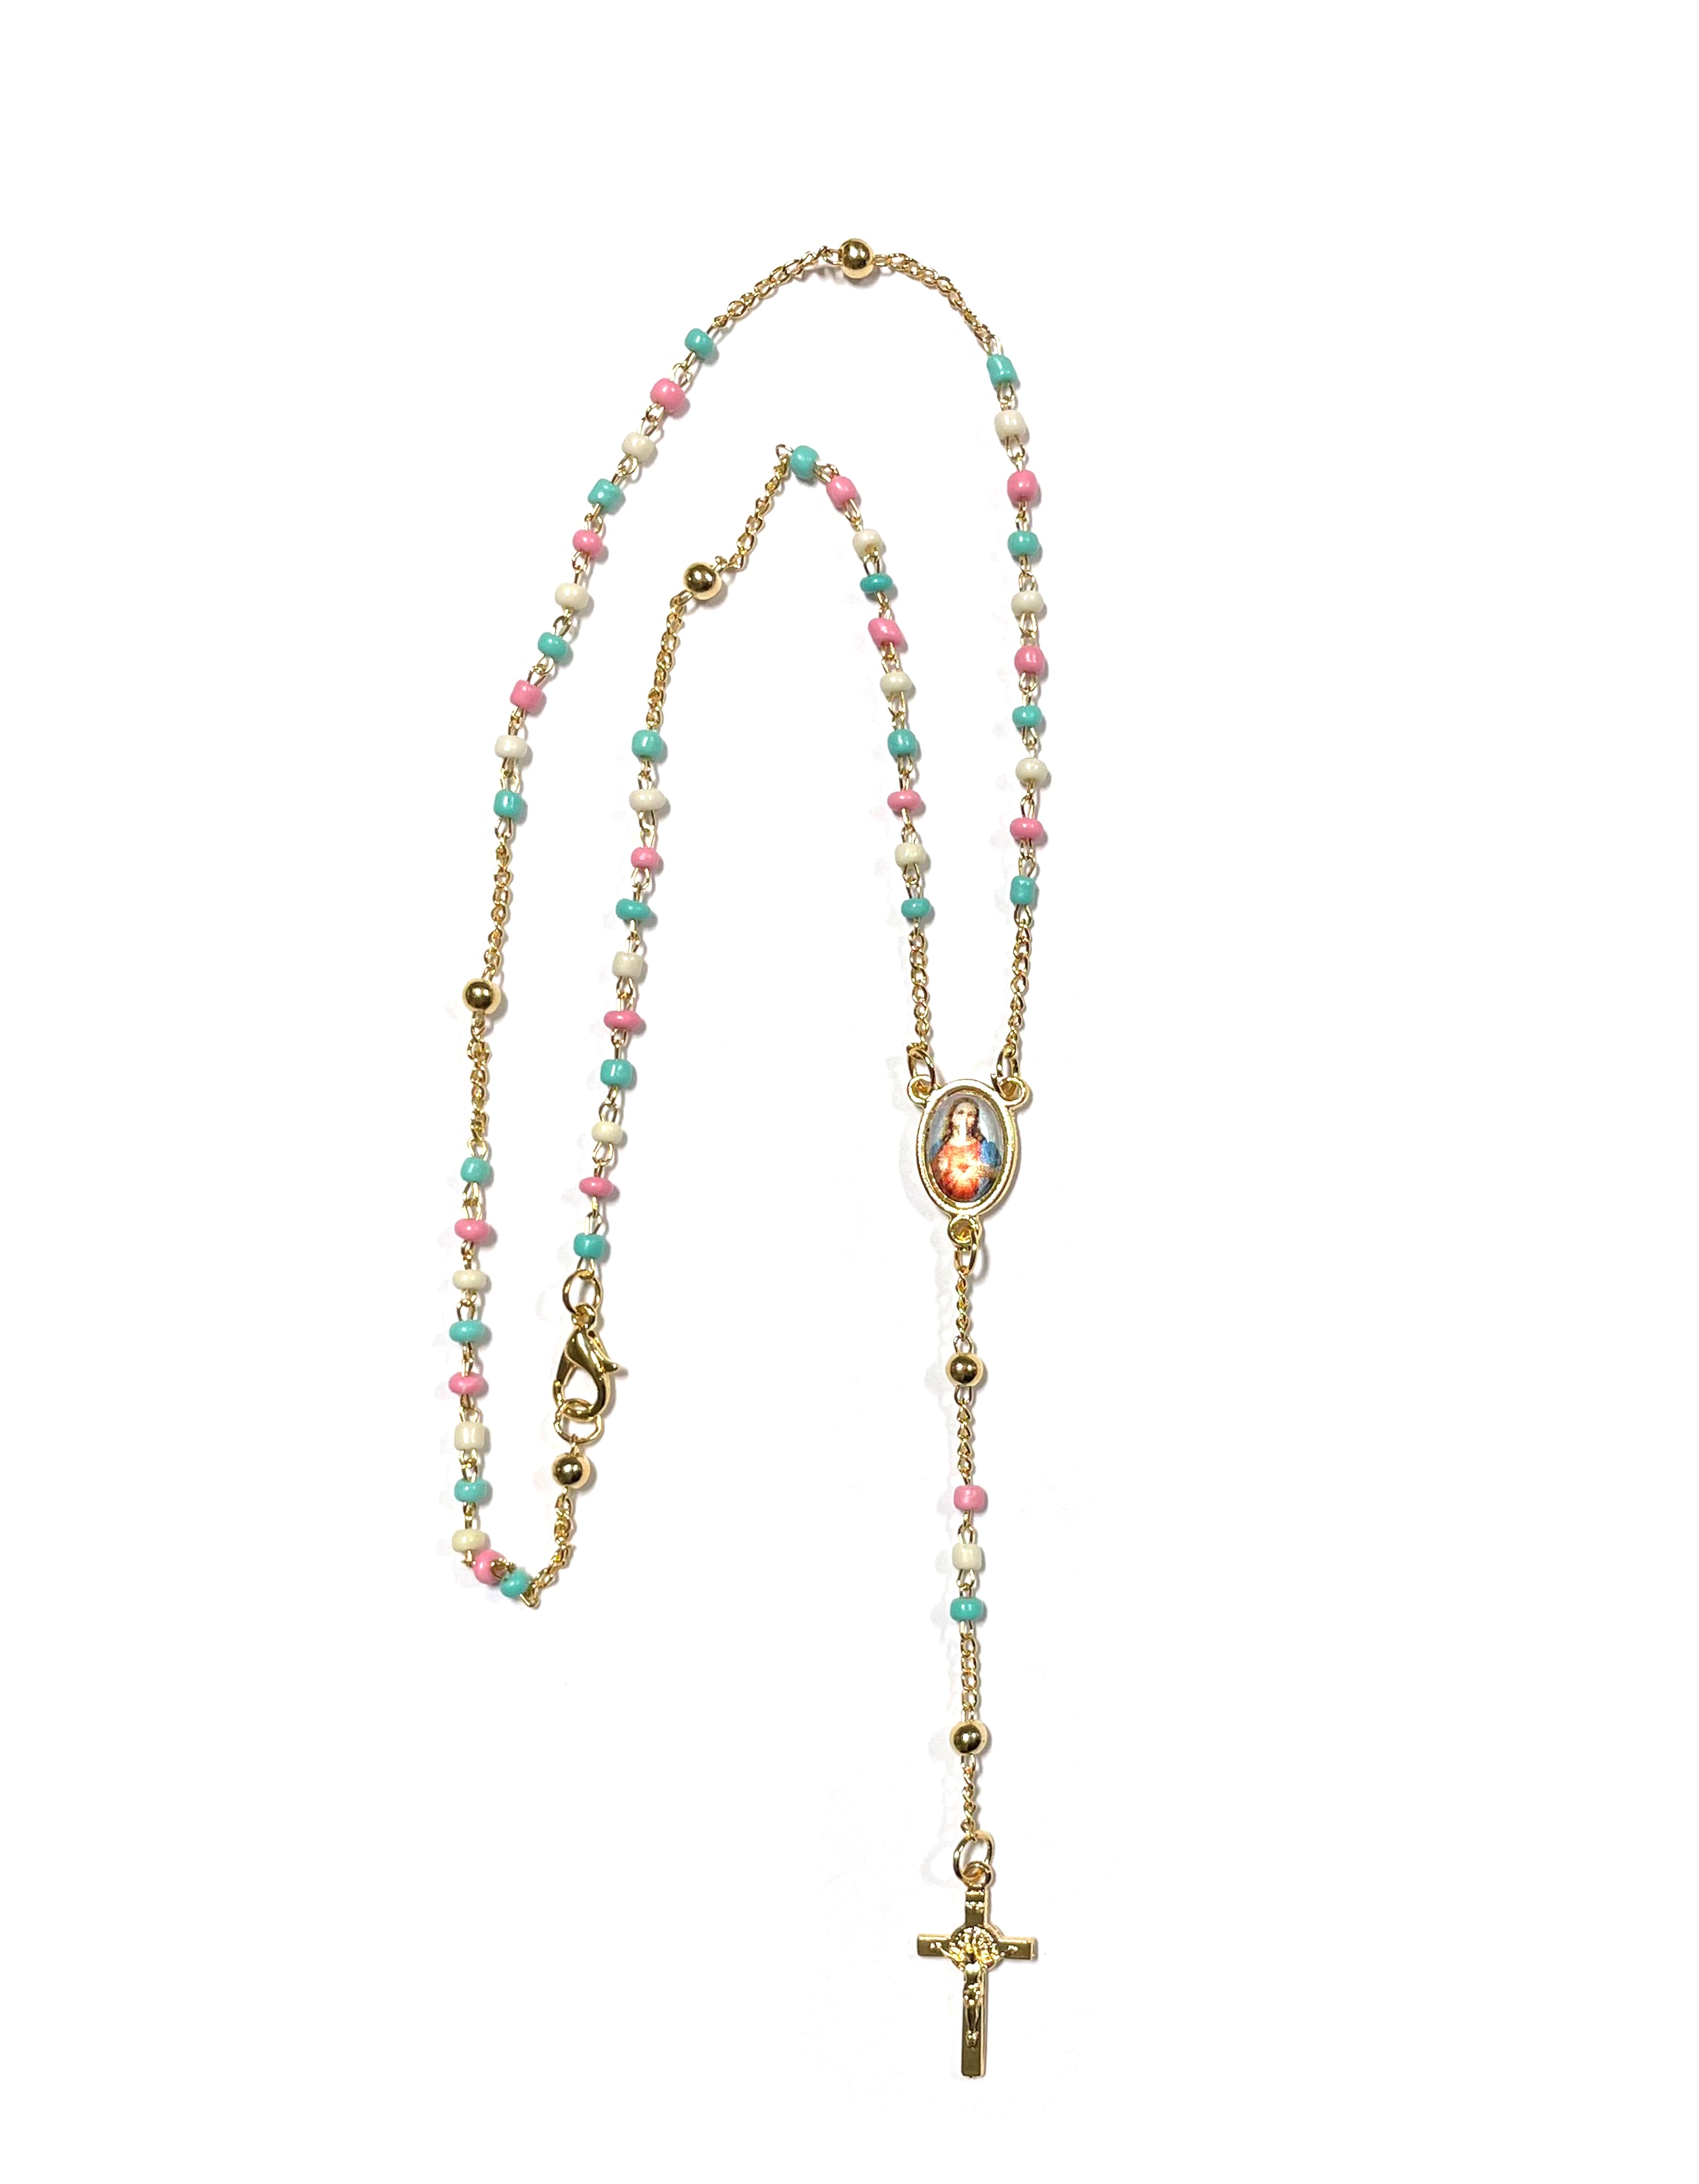 Golden rosary with chain-style colored beads